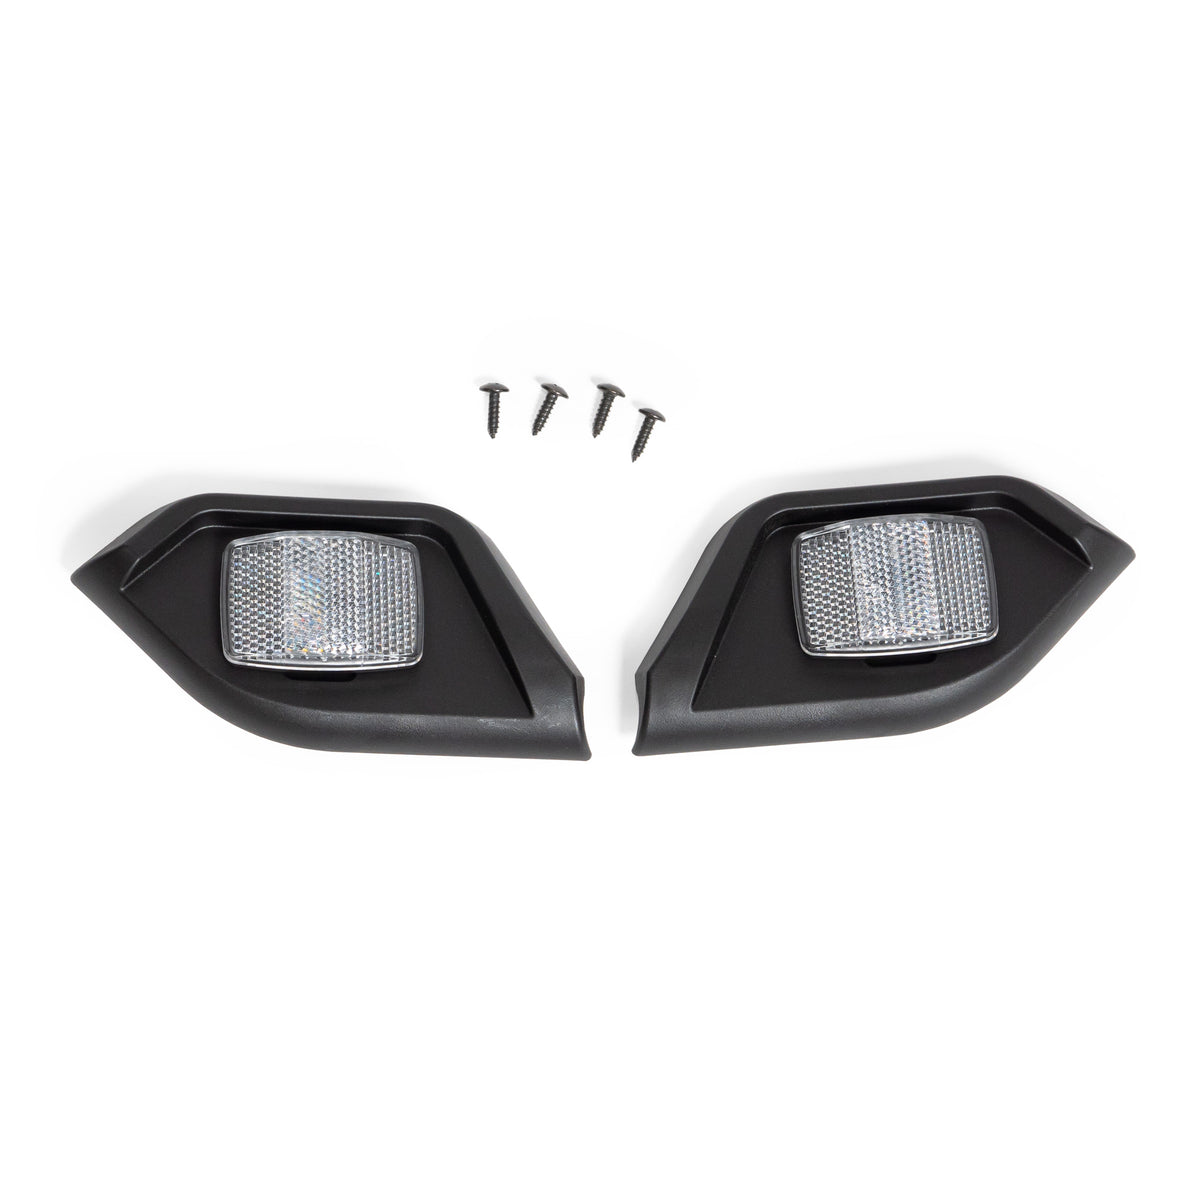 Skid Guard/Front Reflector Mount